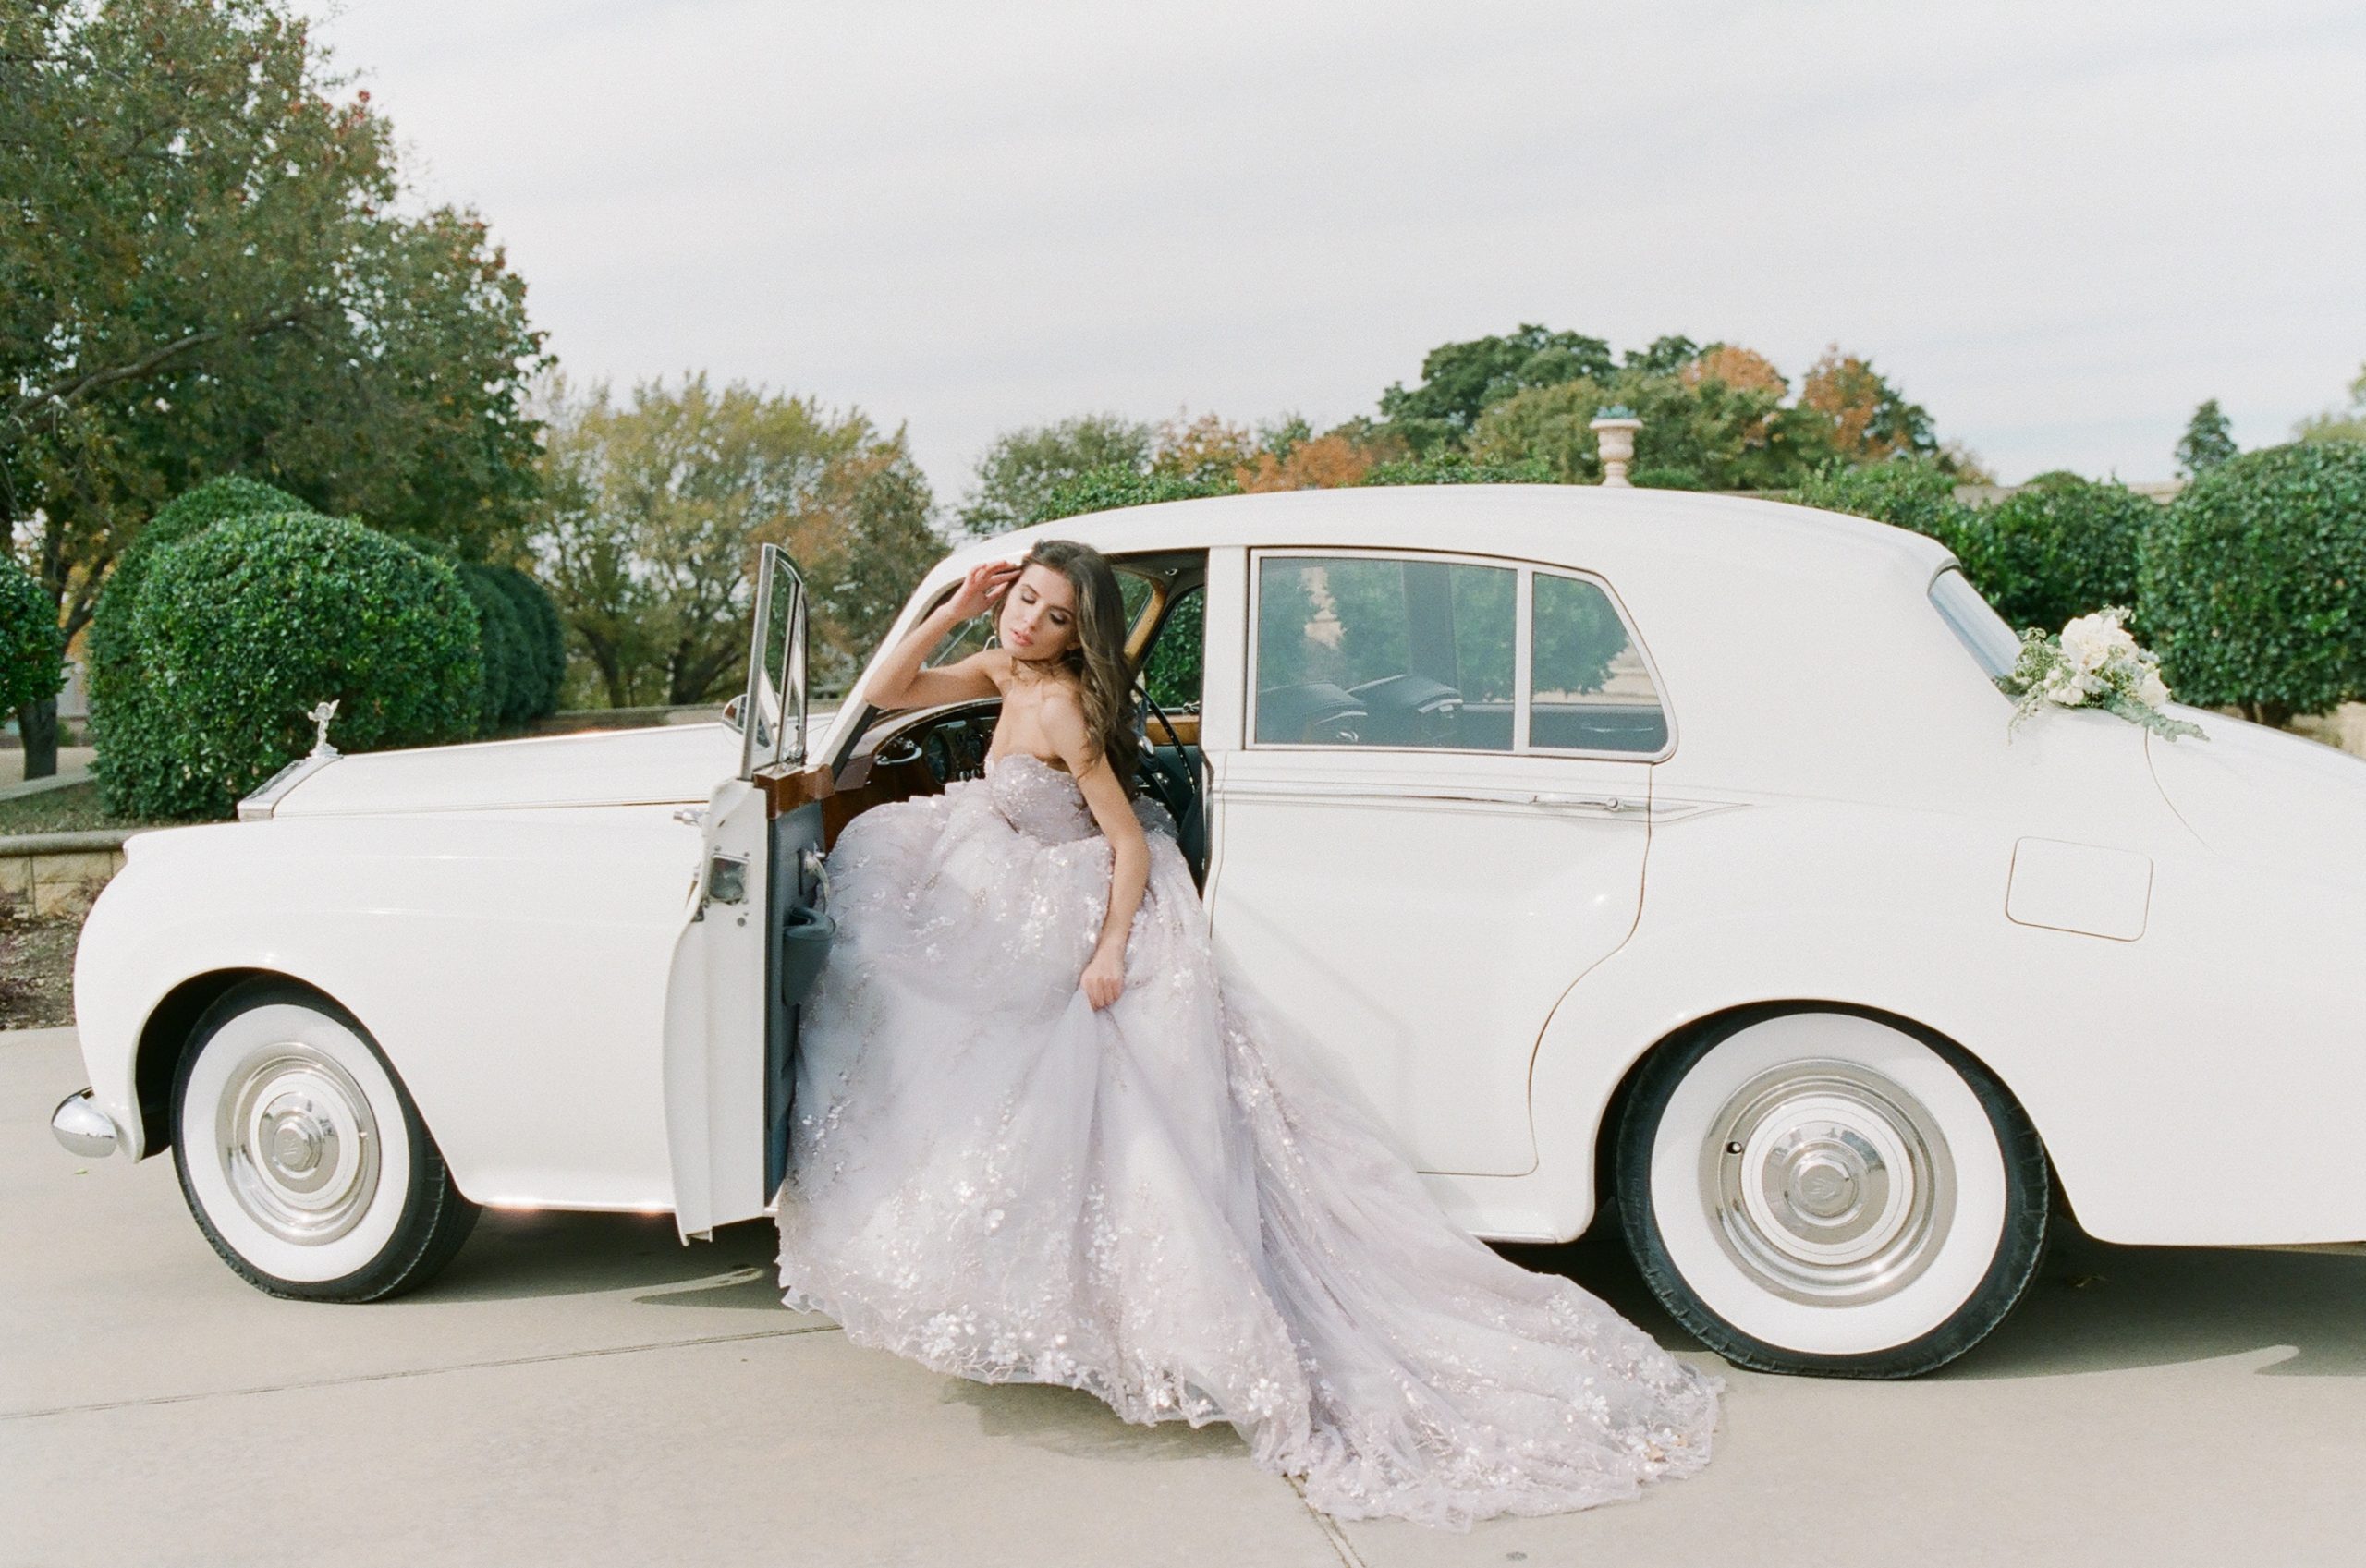 Couture Wedding Dresses Editorial Bride in Sparkling Lavender Gown in White Vintage Car 